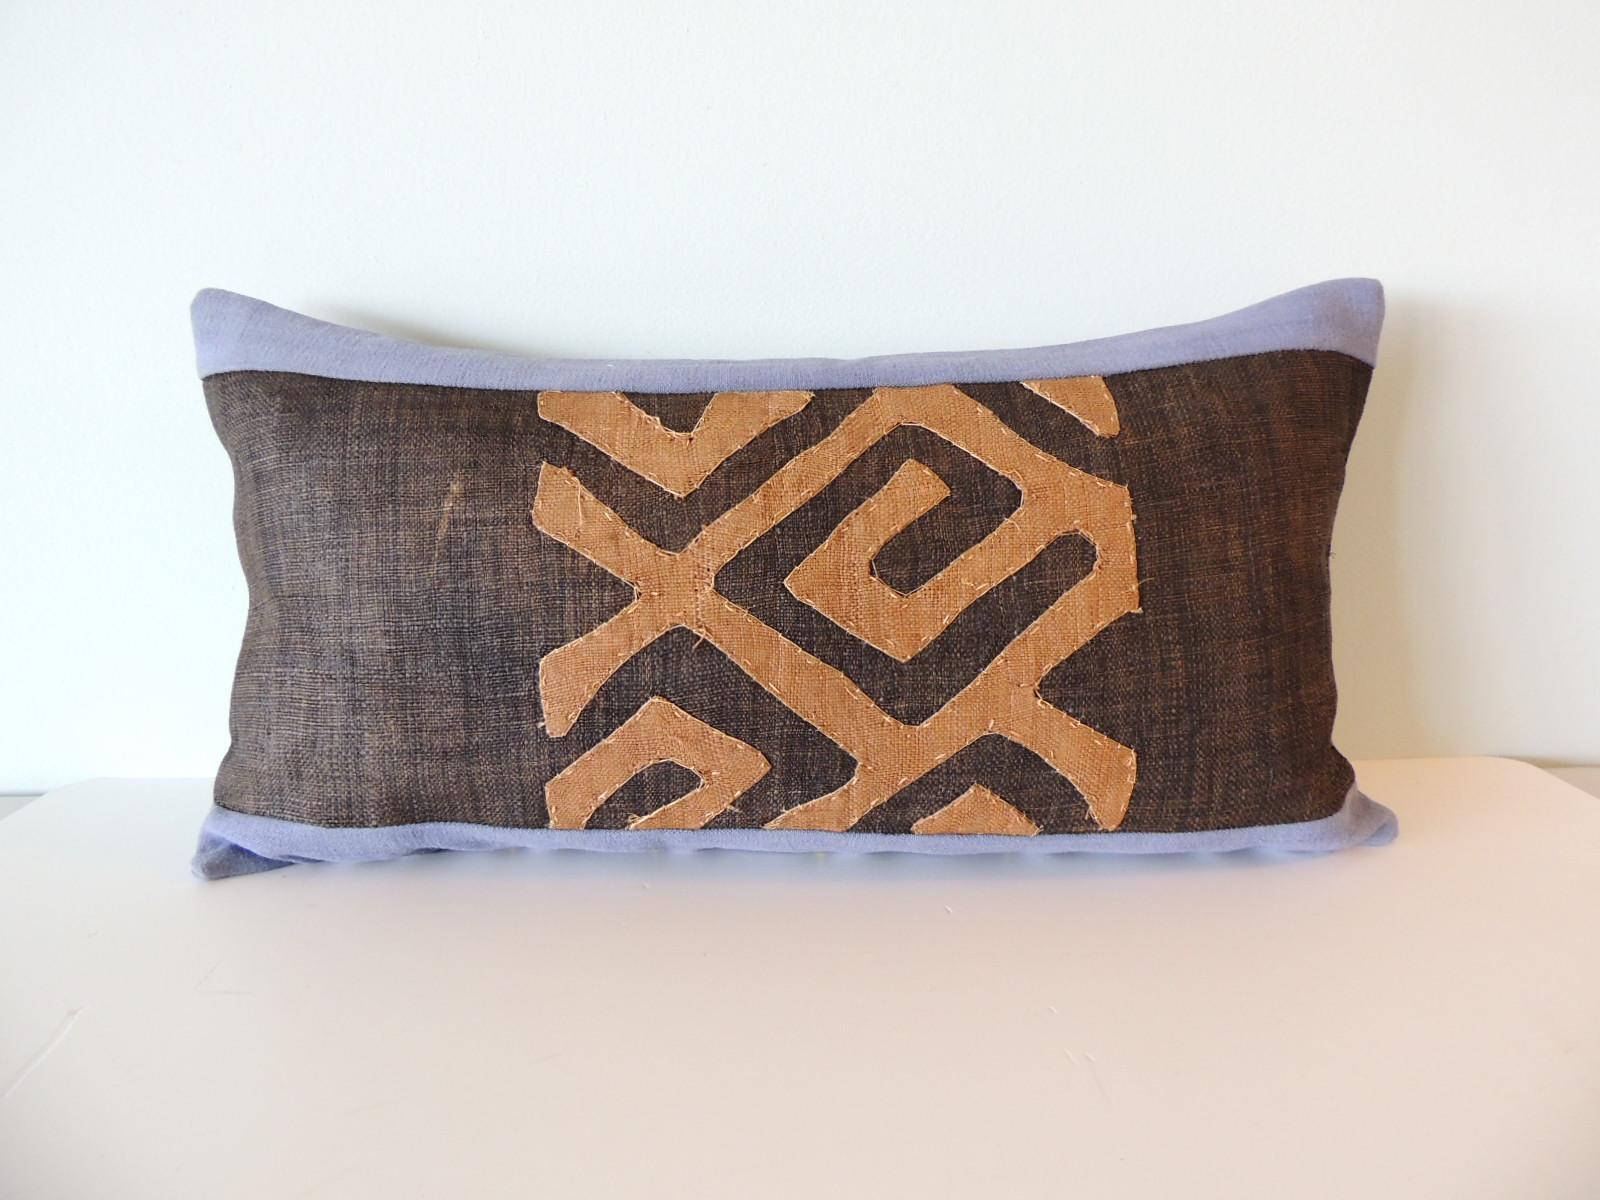 Vintage Kuba Tan and Brown Handwoven African Bolster Decorative Pillow with
antique Wedgewood blue linen backing. 
Handwoven patchwork and appliqué raffia African decorative lumbar pillow with labyrinth pattern.
 Decorative pillow designed and